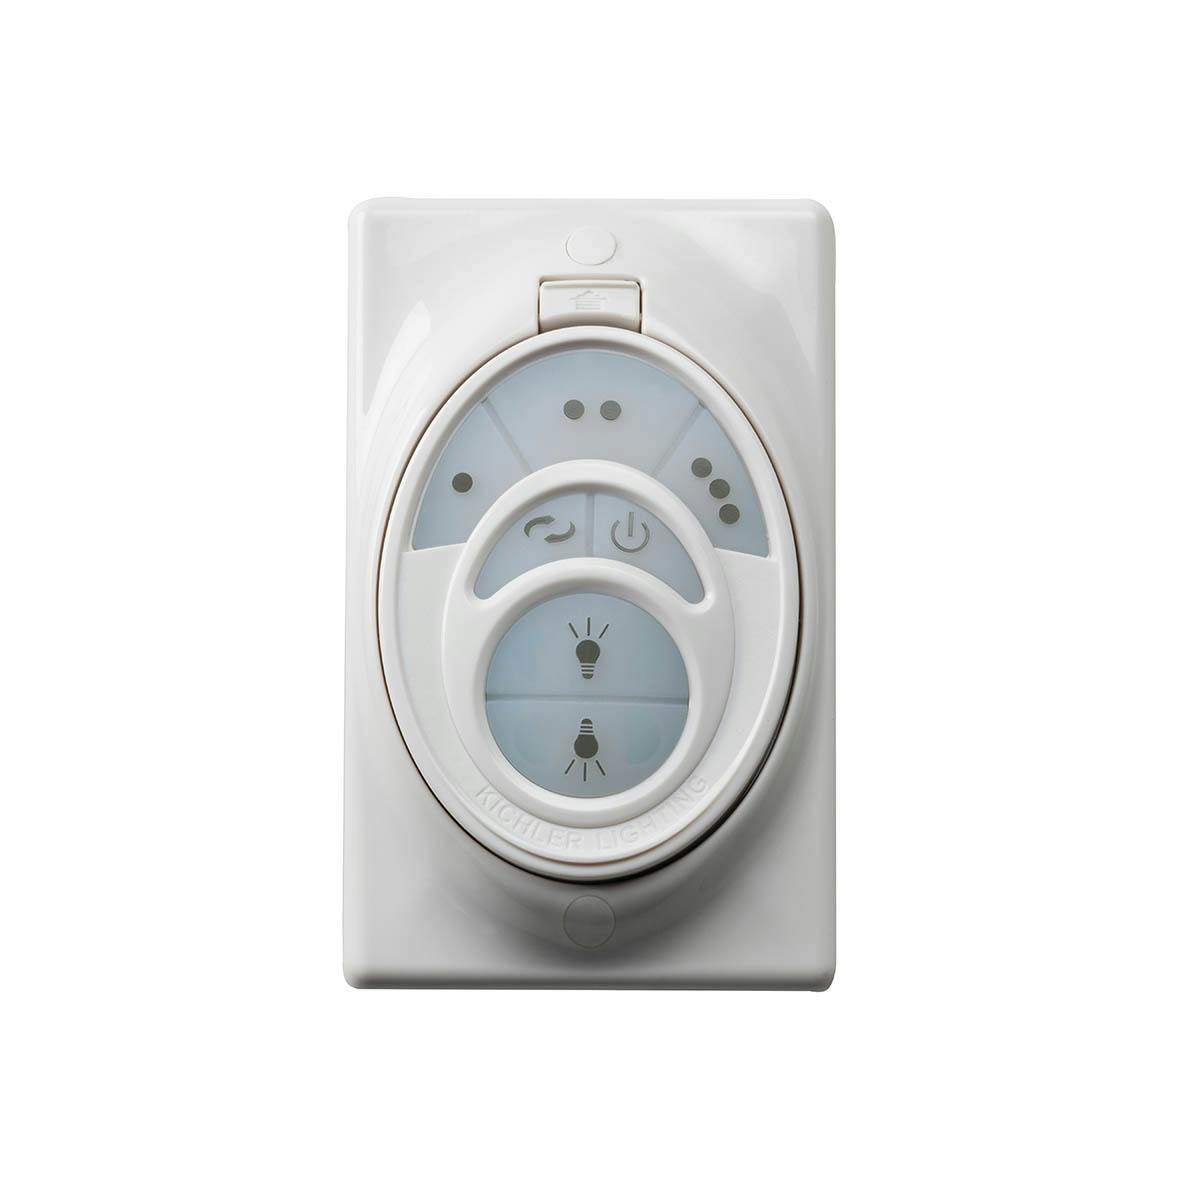 CoolTouch Transmitter Full Function White on a white background